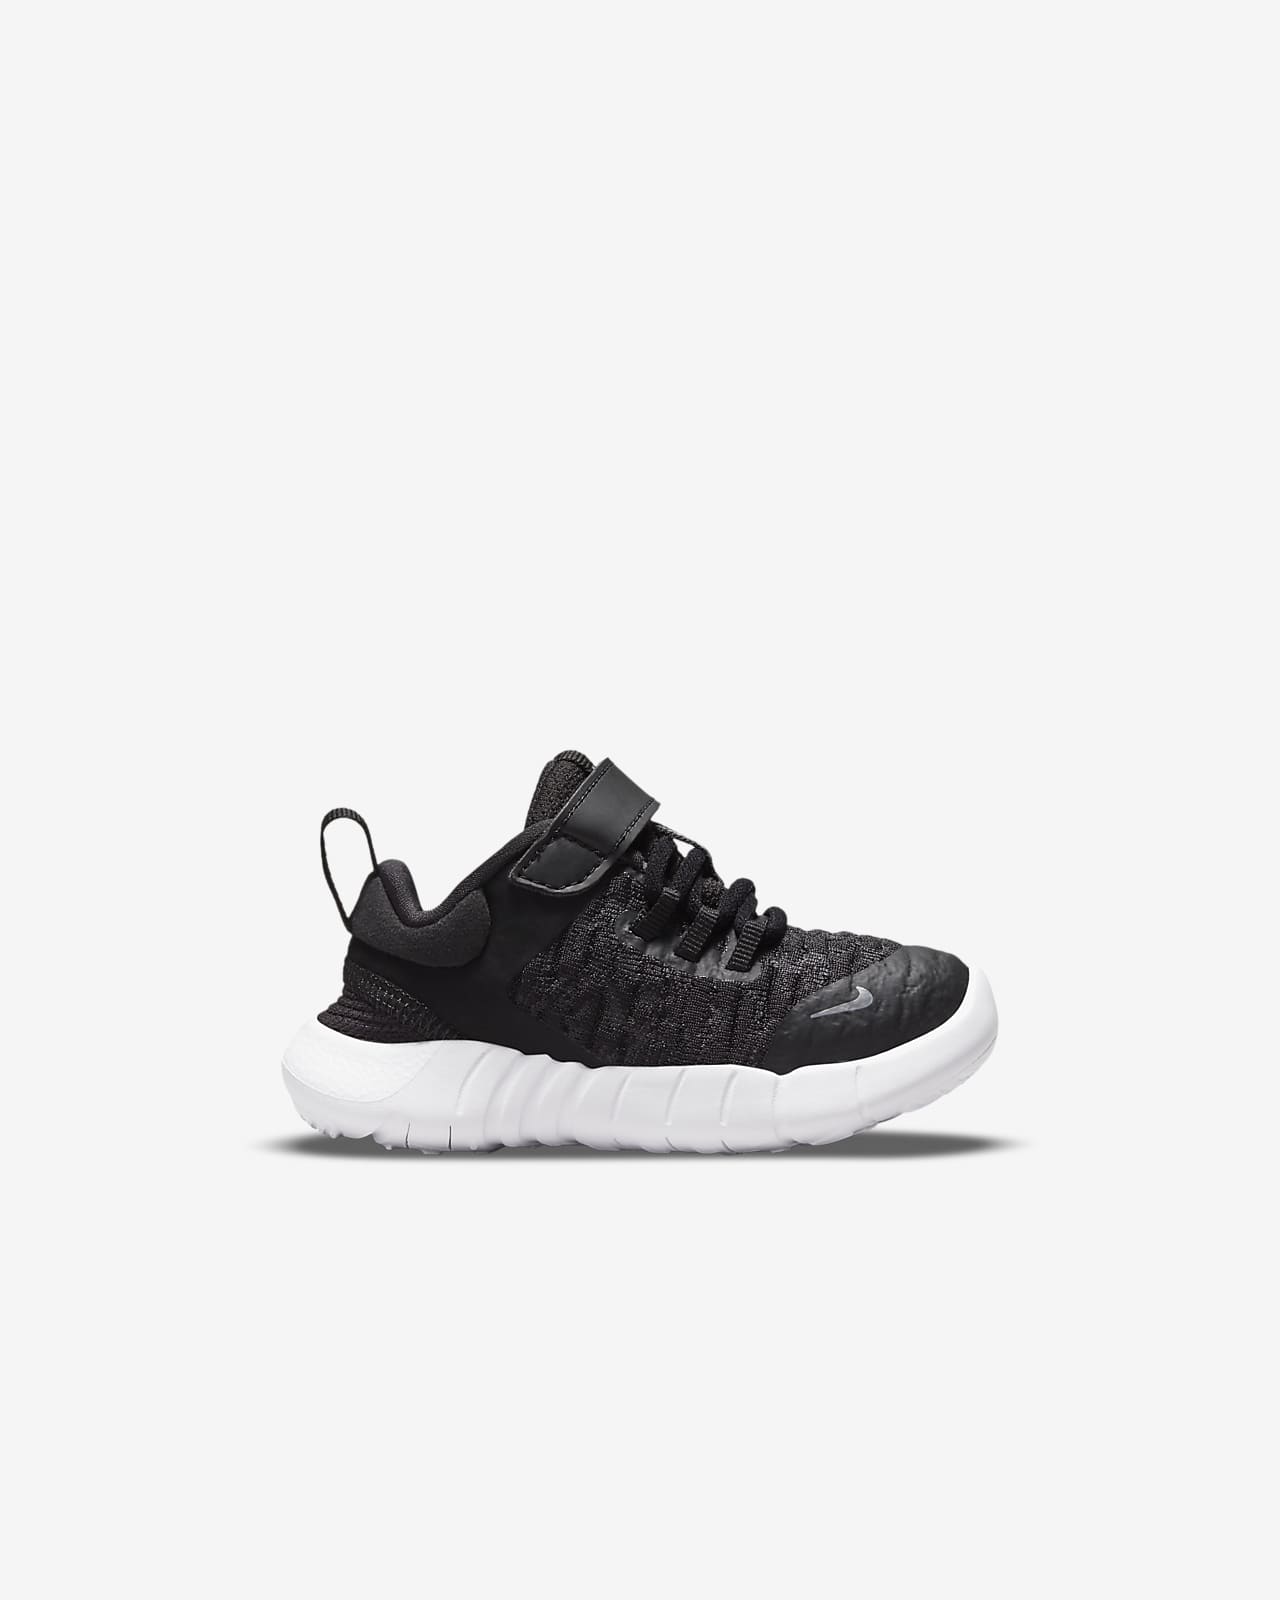 Nike Free RN 2021 Baby/Toddler Shoes in Black, Size: 5C | CZ3997-001